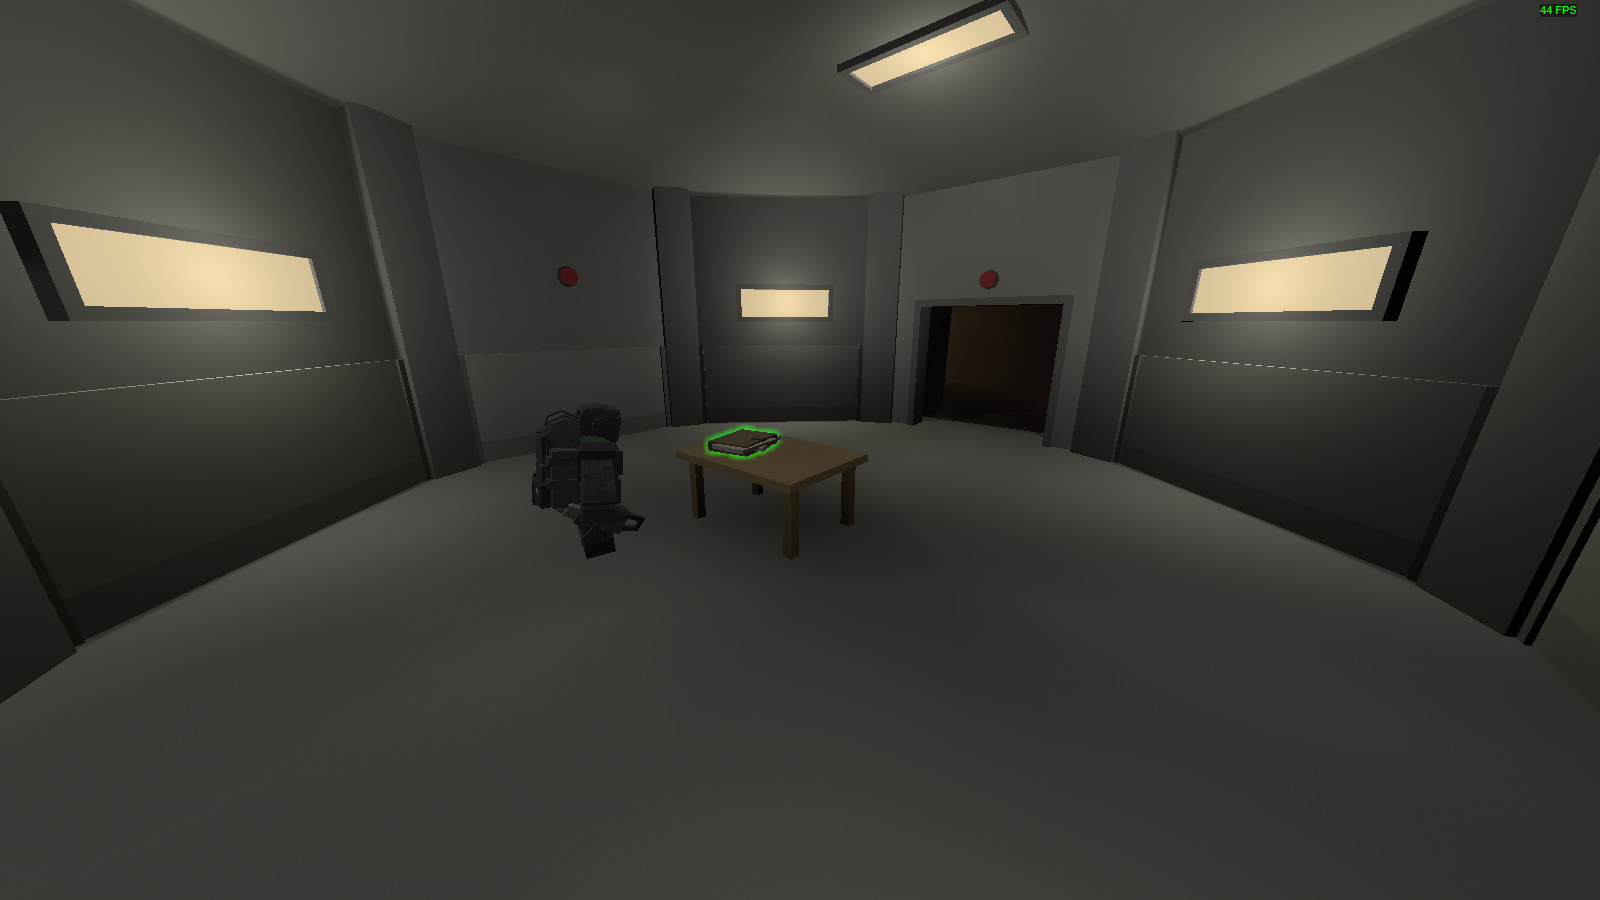 Unturned - Polaris A6 Secret Locations - Intelligence Stolen Without Triggering Alarm - 6A45AAA